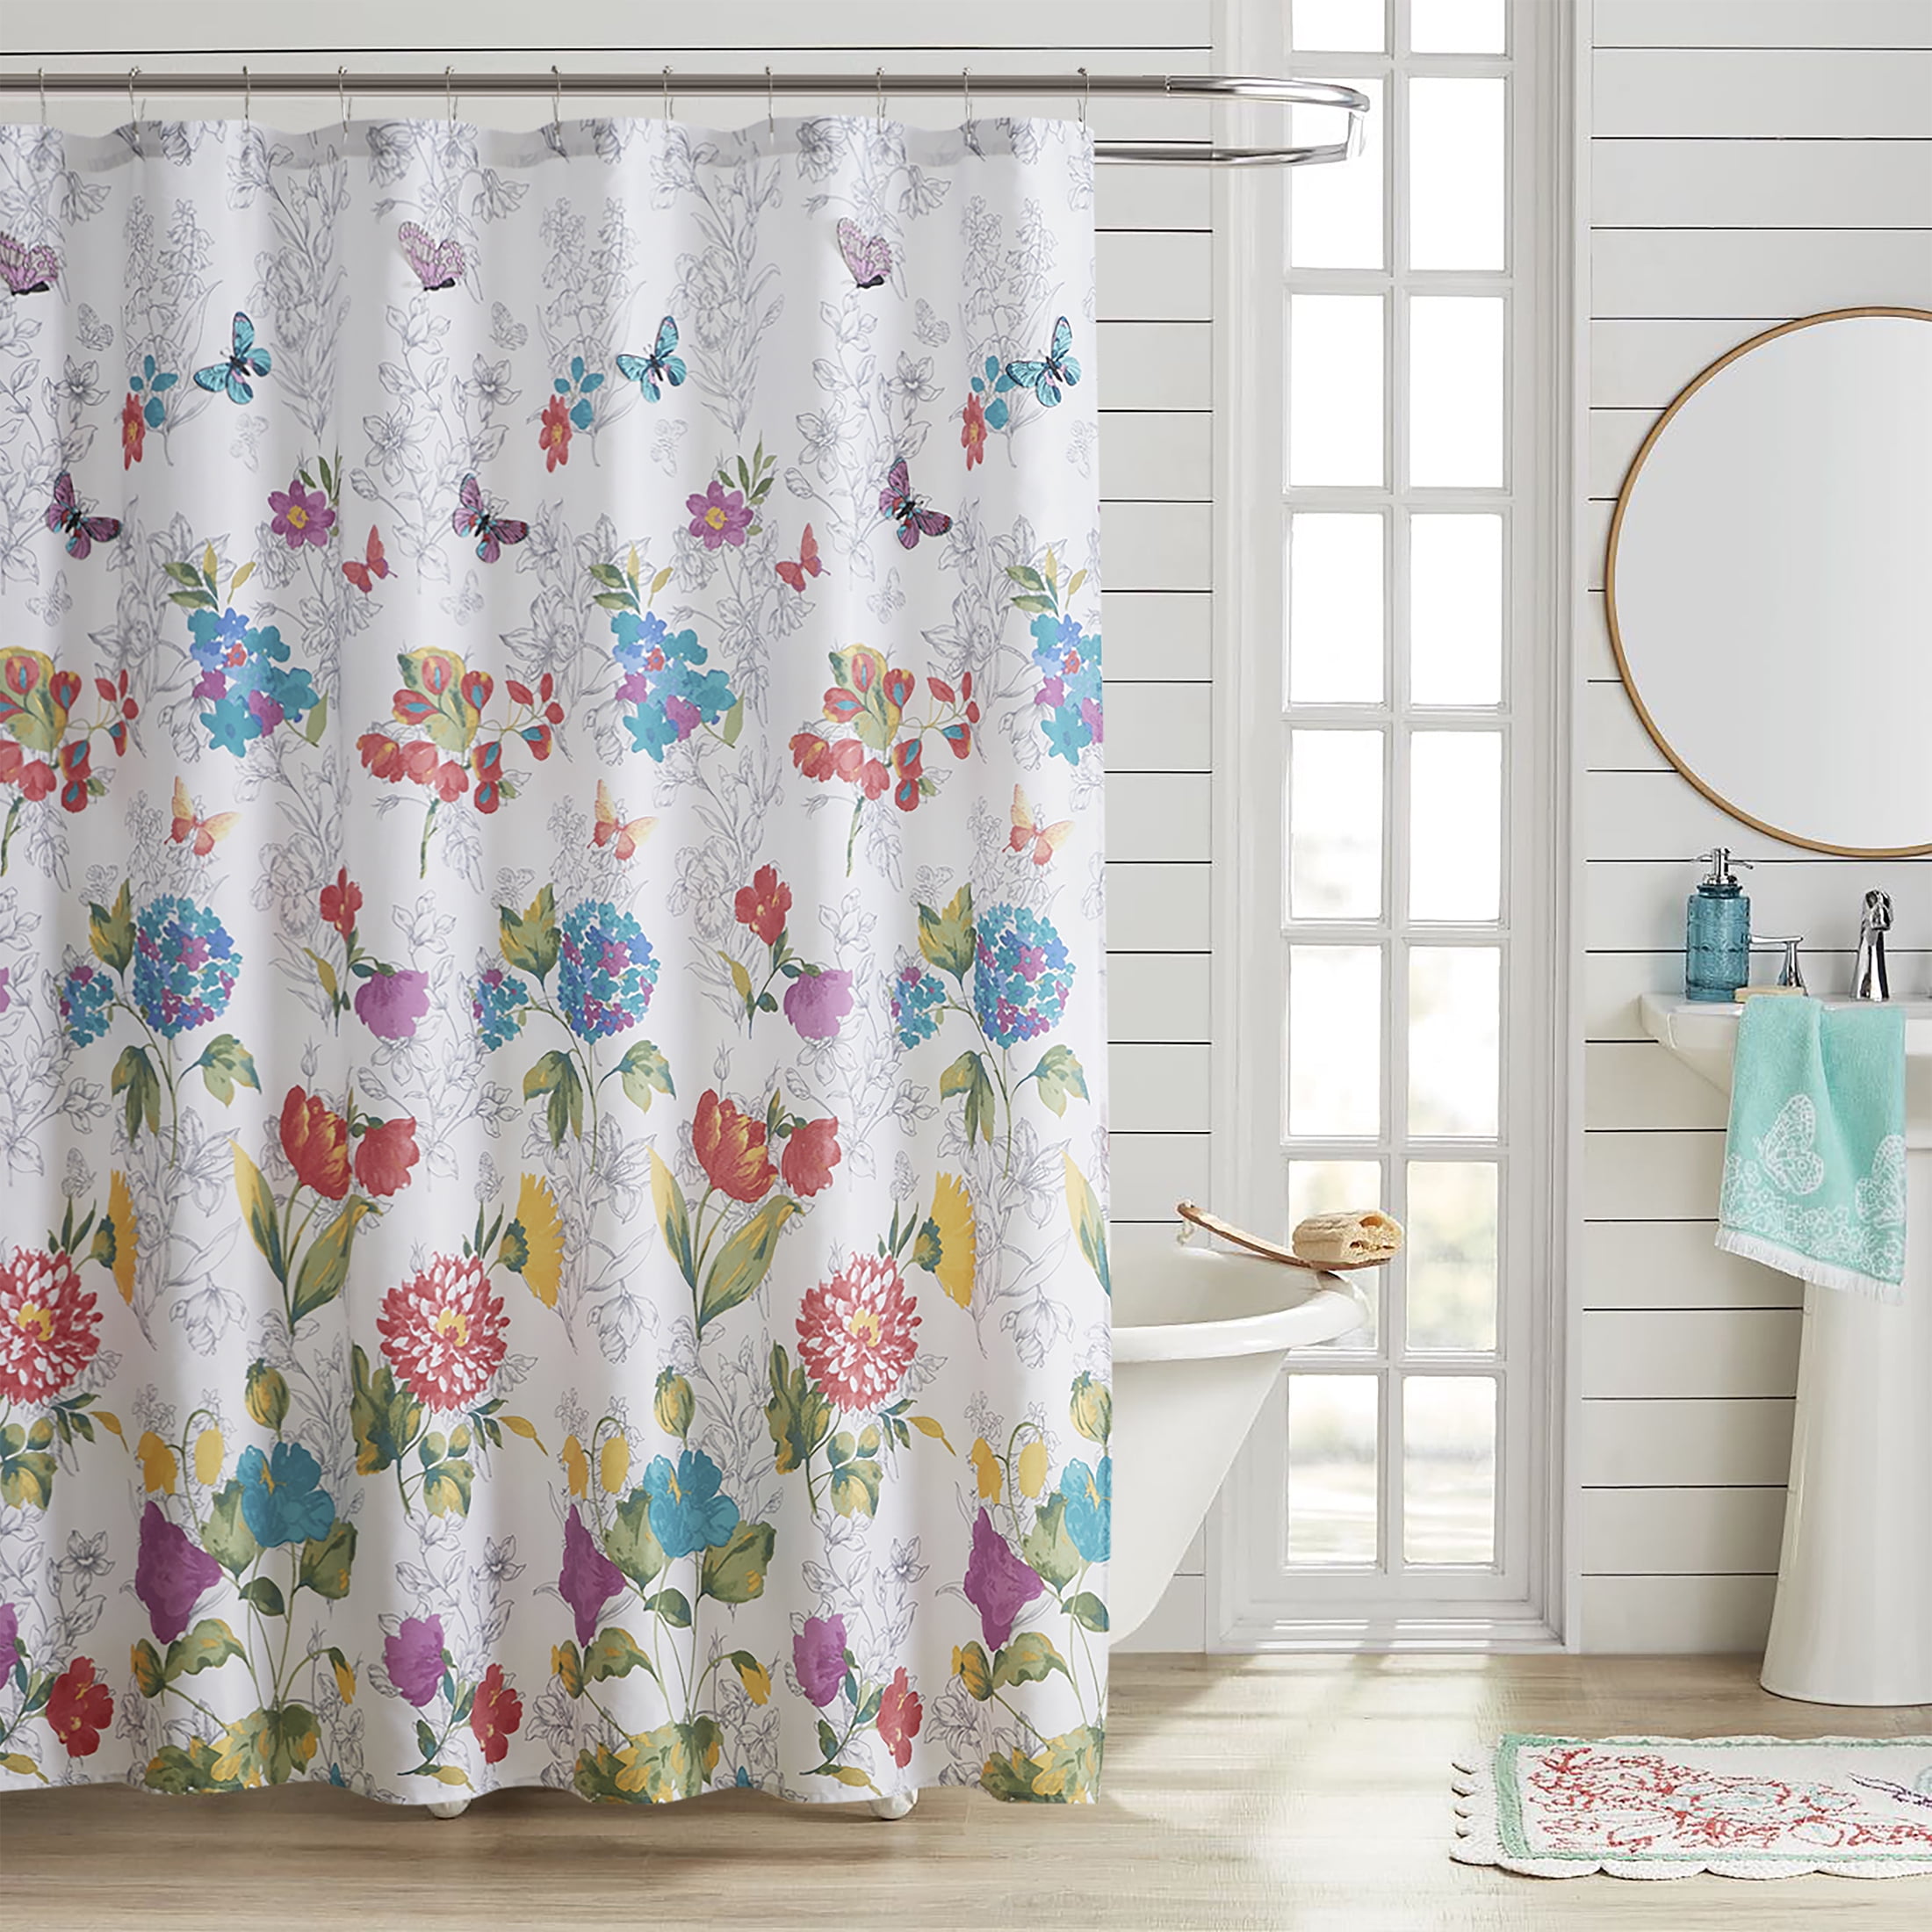 Country Shower Curtain Colored Spring Flowers Print for Bathroom 70 Inches Long 